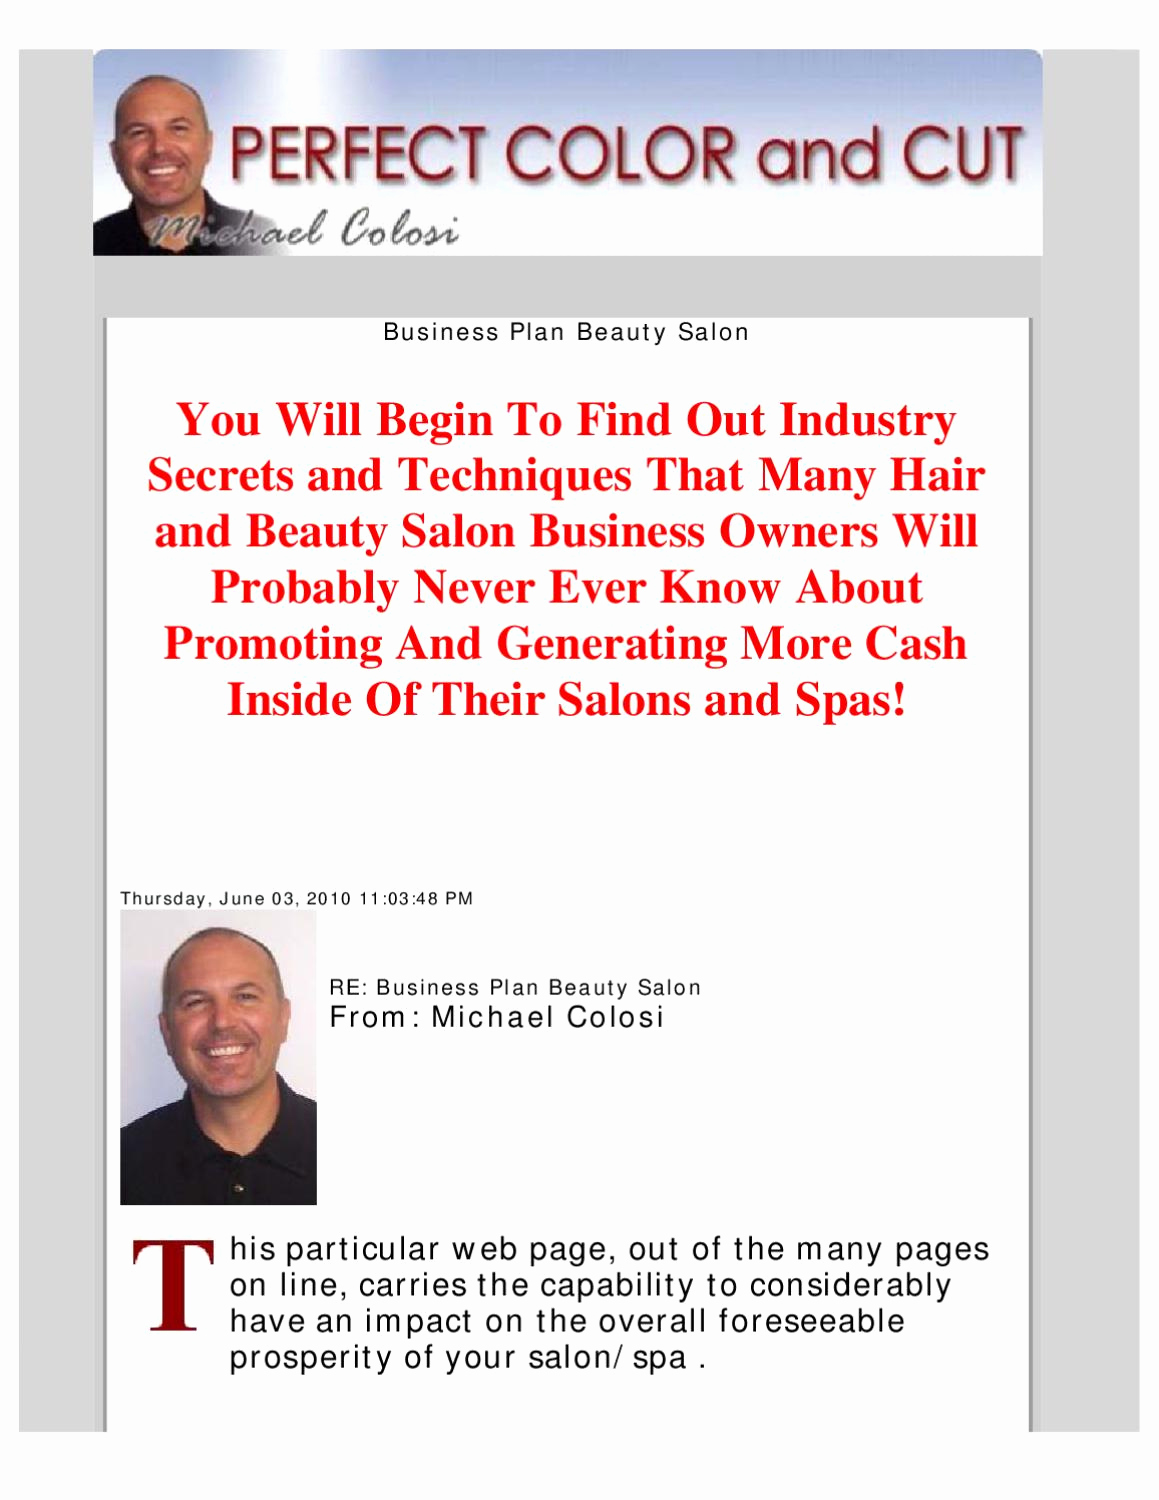 Hair Salons Business Plan New Business Plan Beauty Salon by andrew S issuu